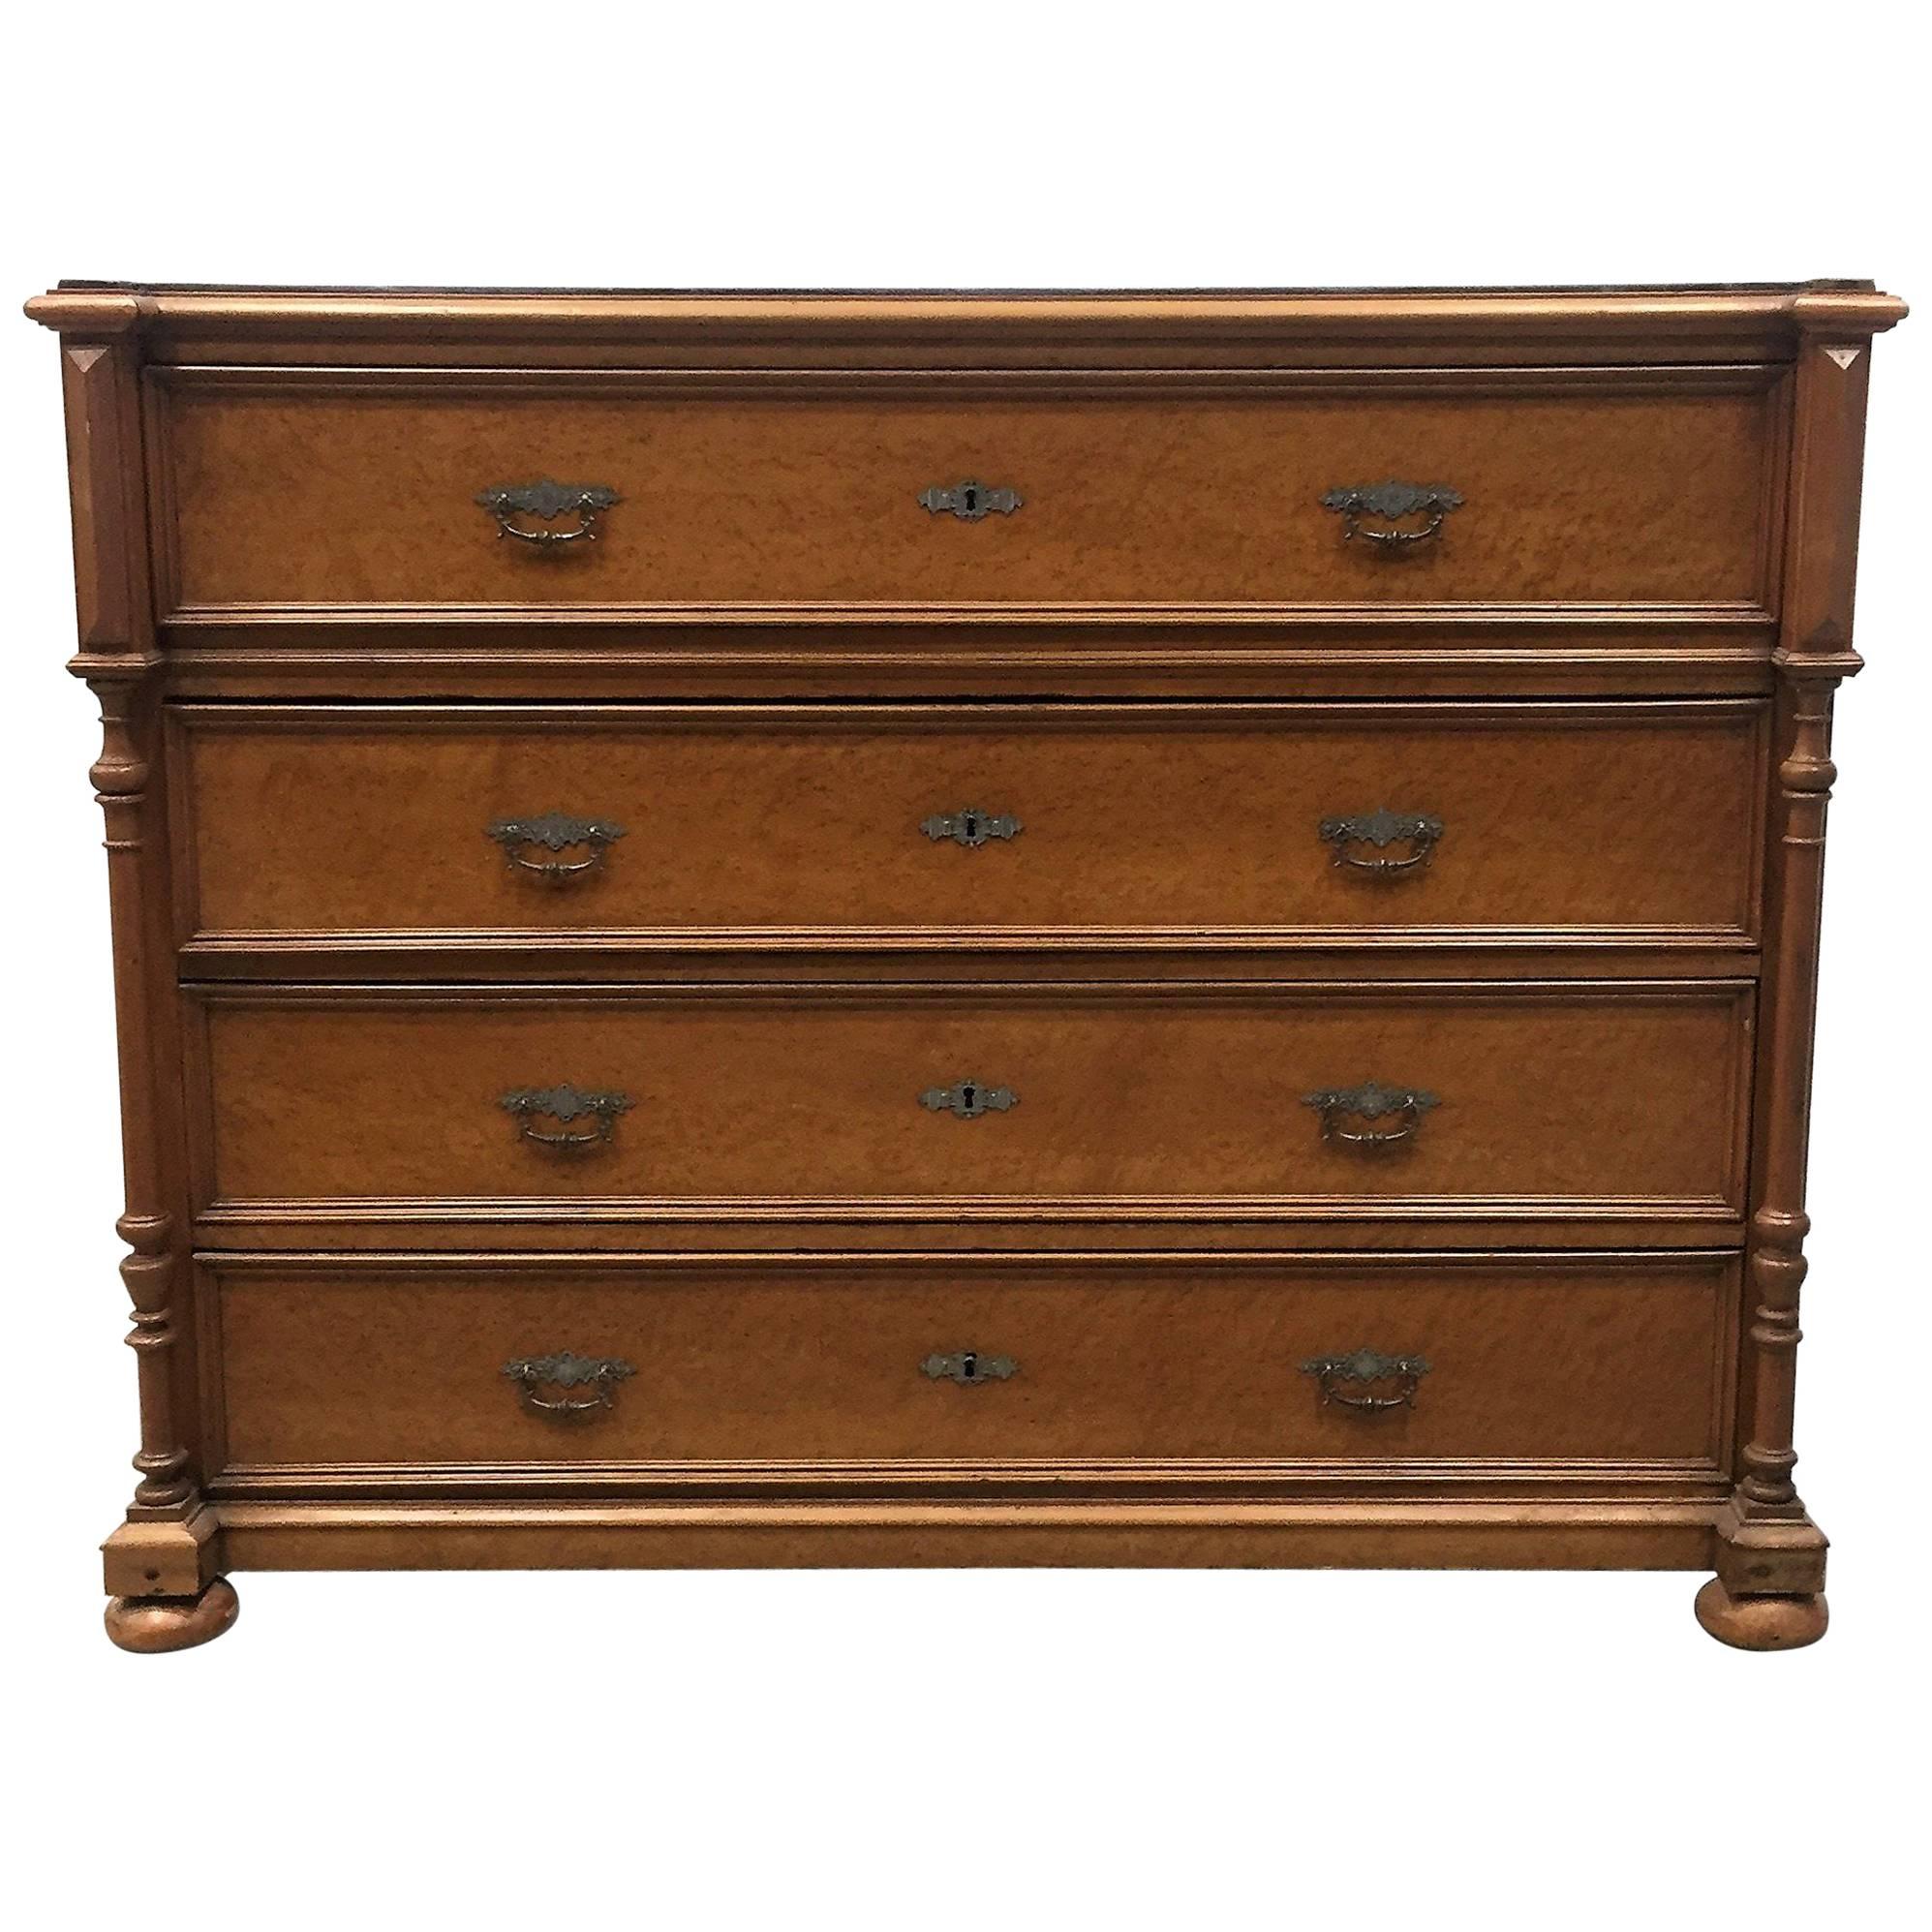 Large 19th Century Louis Philippe Period Bookmatched Commode Chest